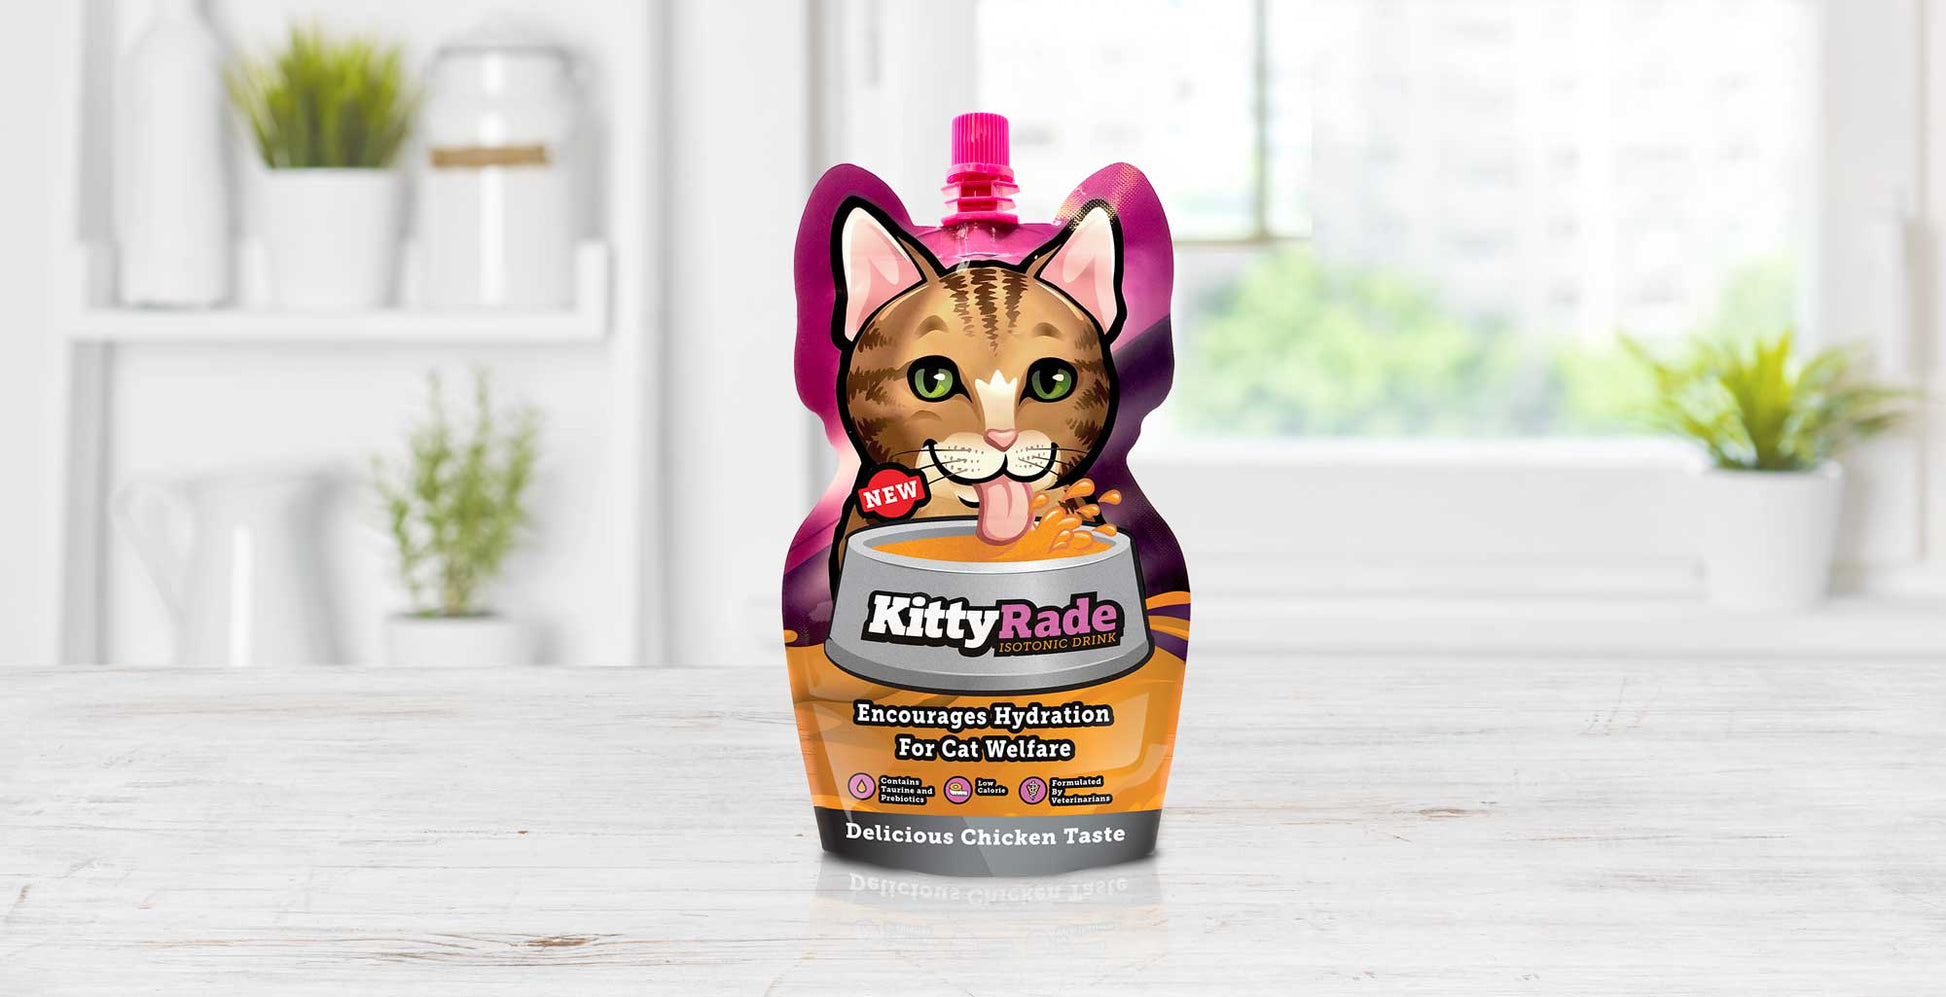 2 KittyRade Prebiotic for dogs from Pets Planet - South Africa’s No.1 Online Pet Store for premium pet products, best pet store near me, pet food, dog prebiotic, prebiotic for dogs, prebiotic for pets, pet prebiotic, pet treats, pet snacks, dog treats, dog snacks, dog bed, dog beds, washable dog bed, takealot dog bed, plush dog bed, Complete Pet Nutrition, hills dog food, optimizor dog food, royal canin dog food, jock dog food, bobtail dog food, canine cuisine, acana dog food